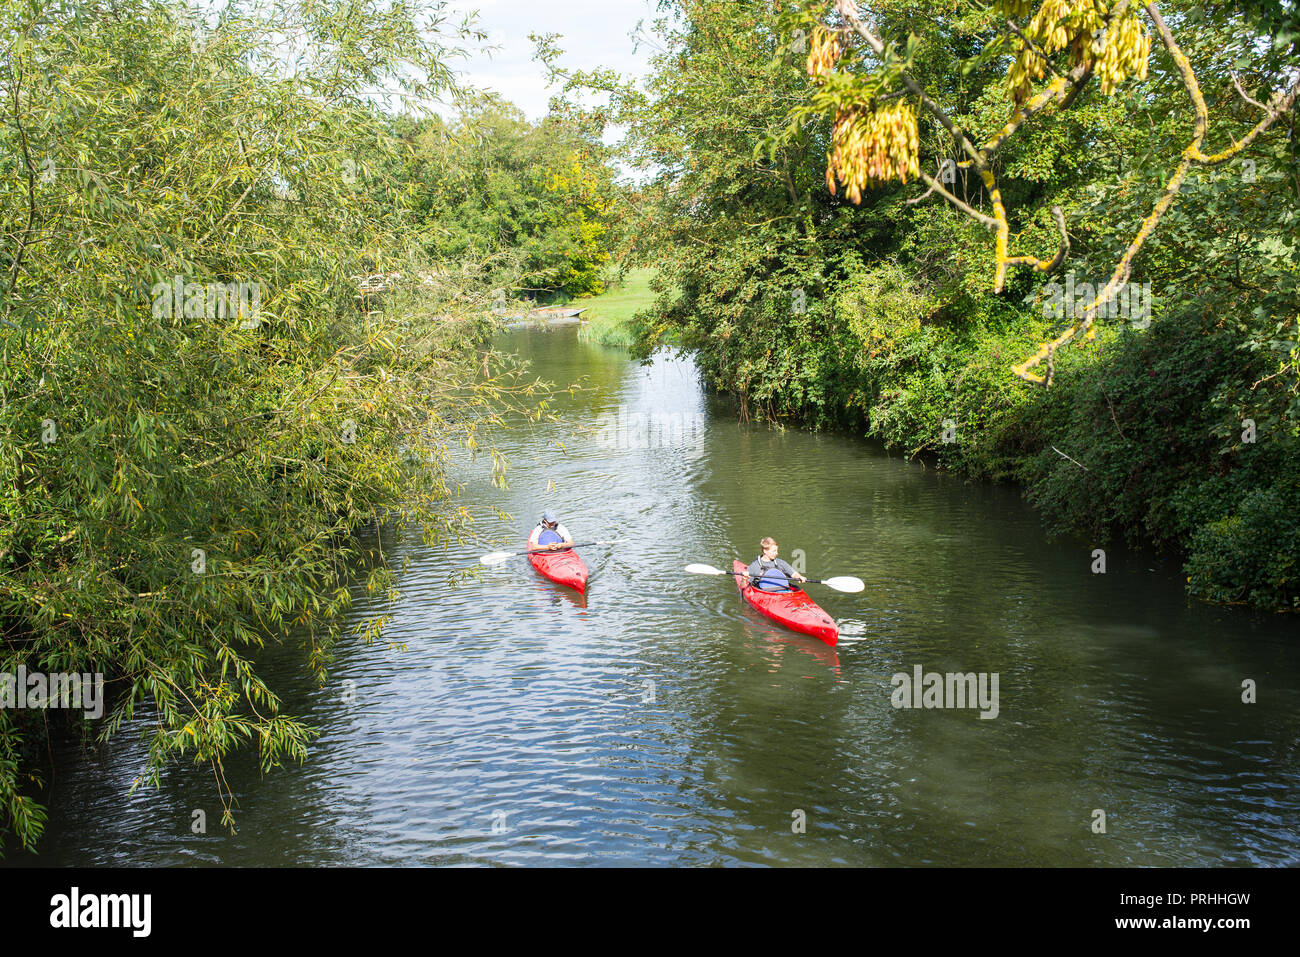 Cambridge, UK -  September 2018. Two men kayaking on red single kayaks on a muddy small river (river Cam) surrounded by lush vegetation. Stock Photo